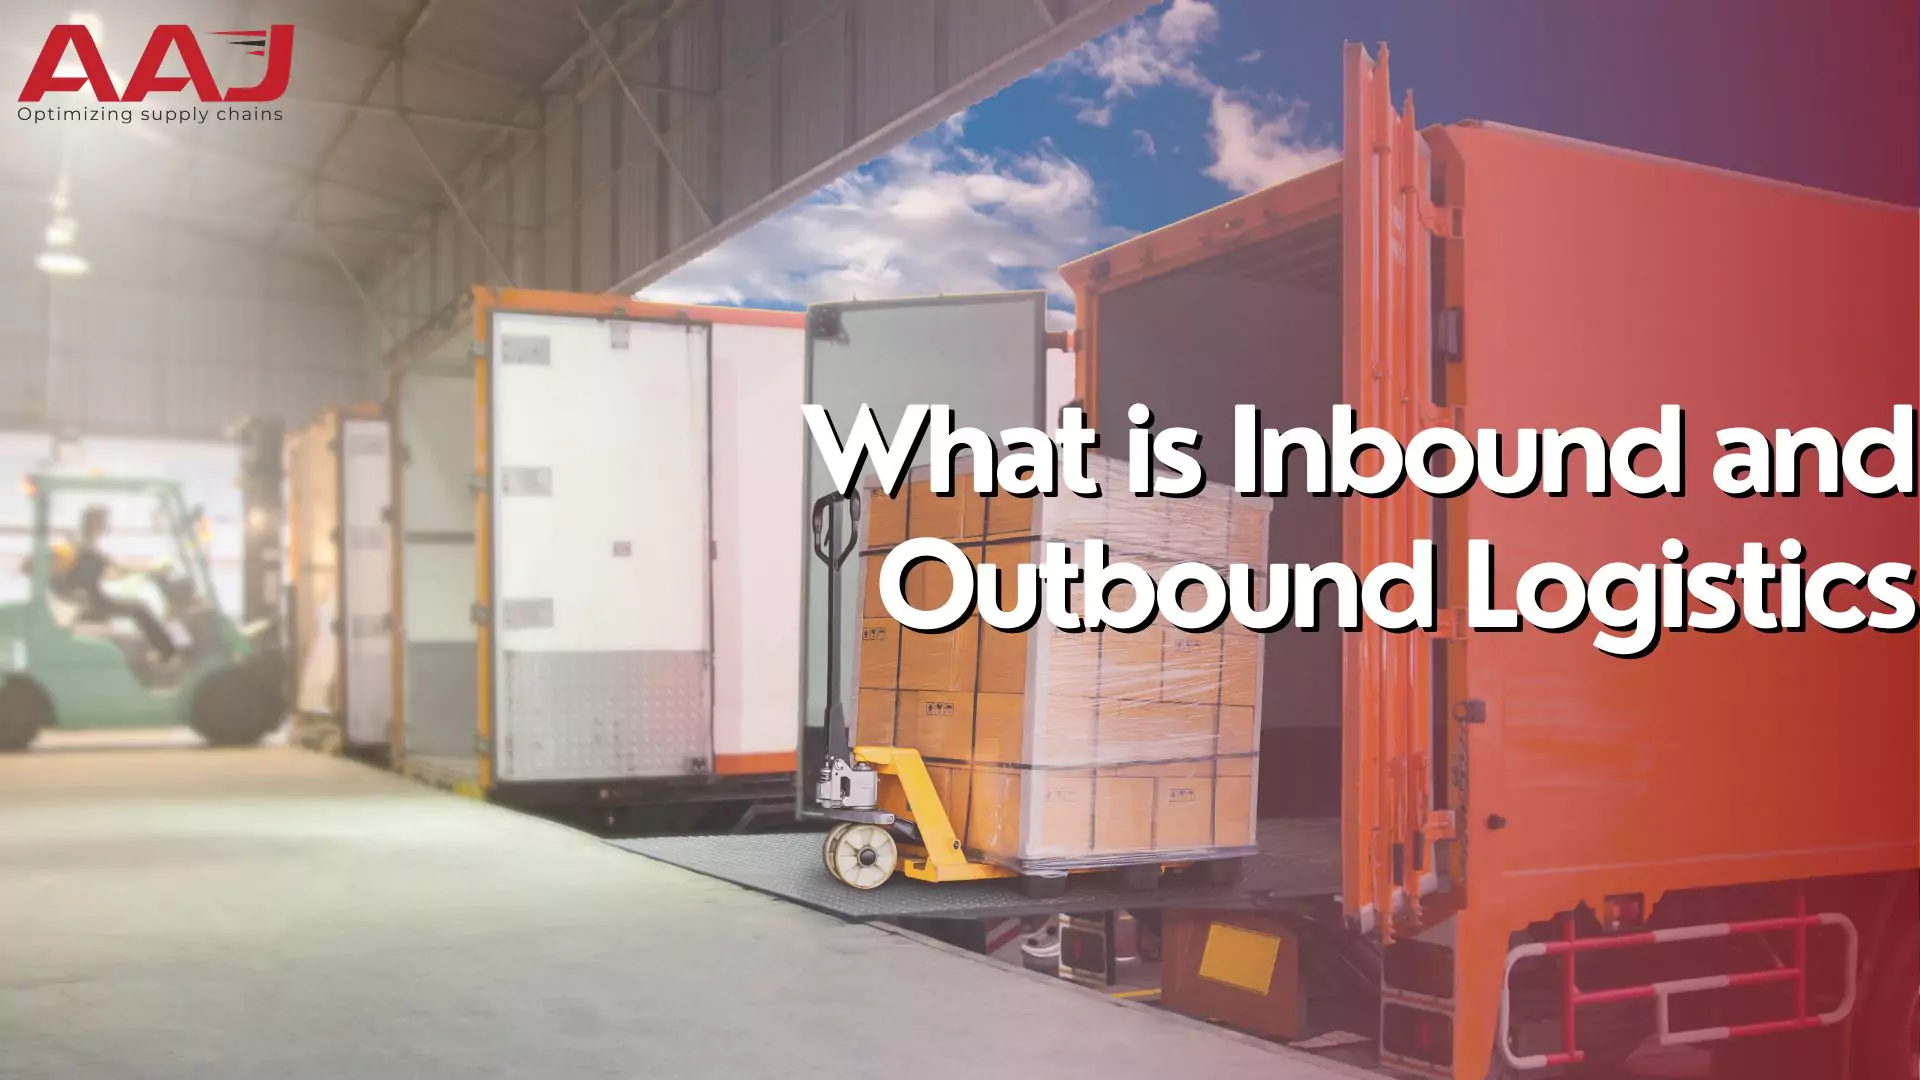 What is Inbound Logistics? The Difference Between Inbound and Outbound Logistics